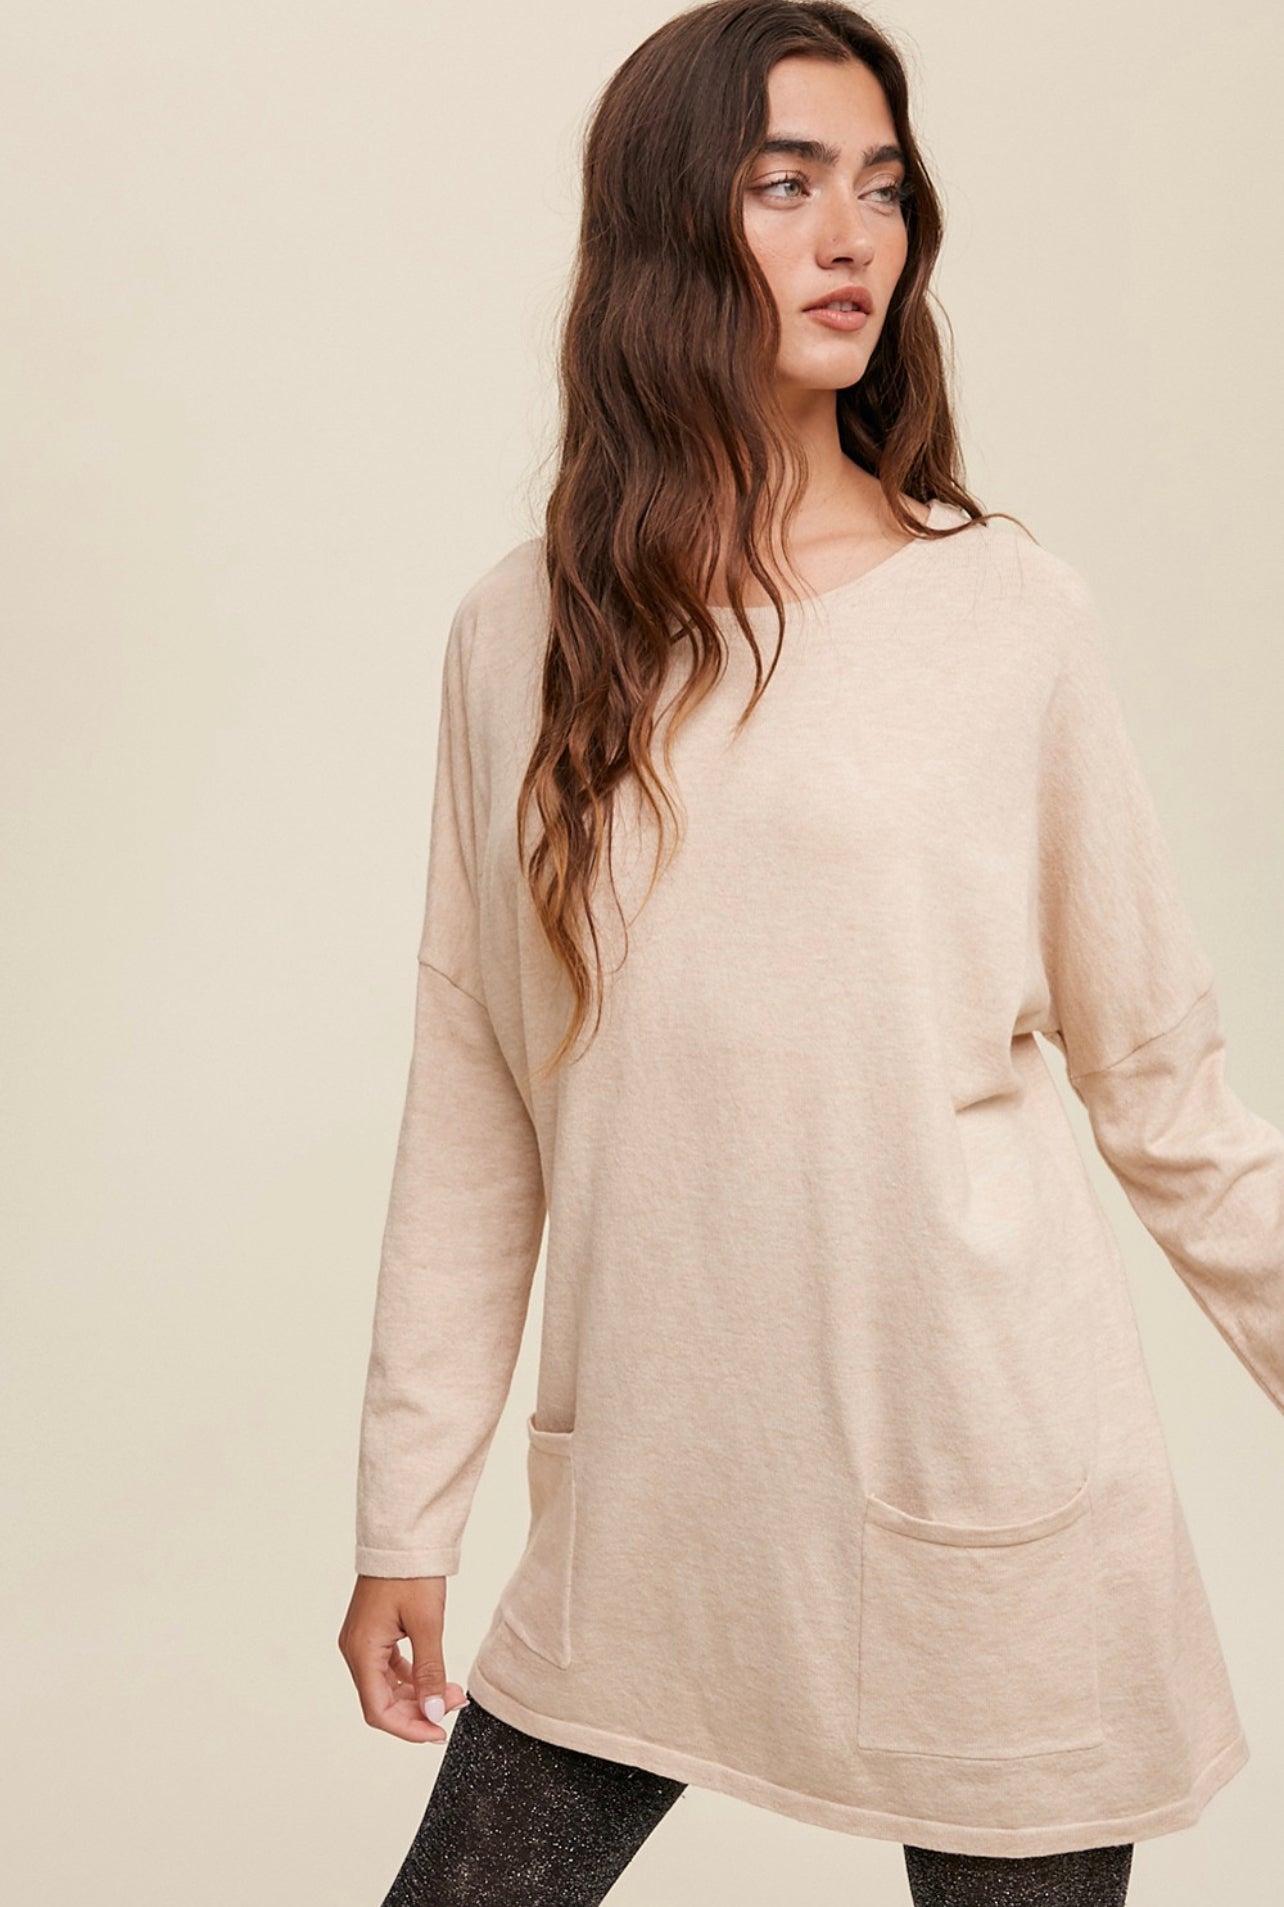 A Good Thing Going Sweater in Oatmeal